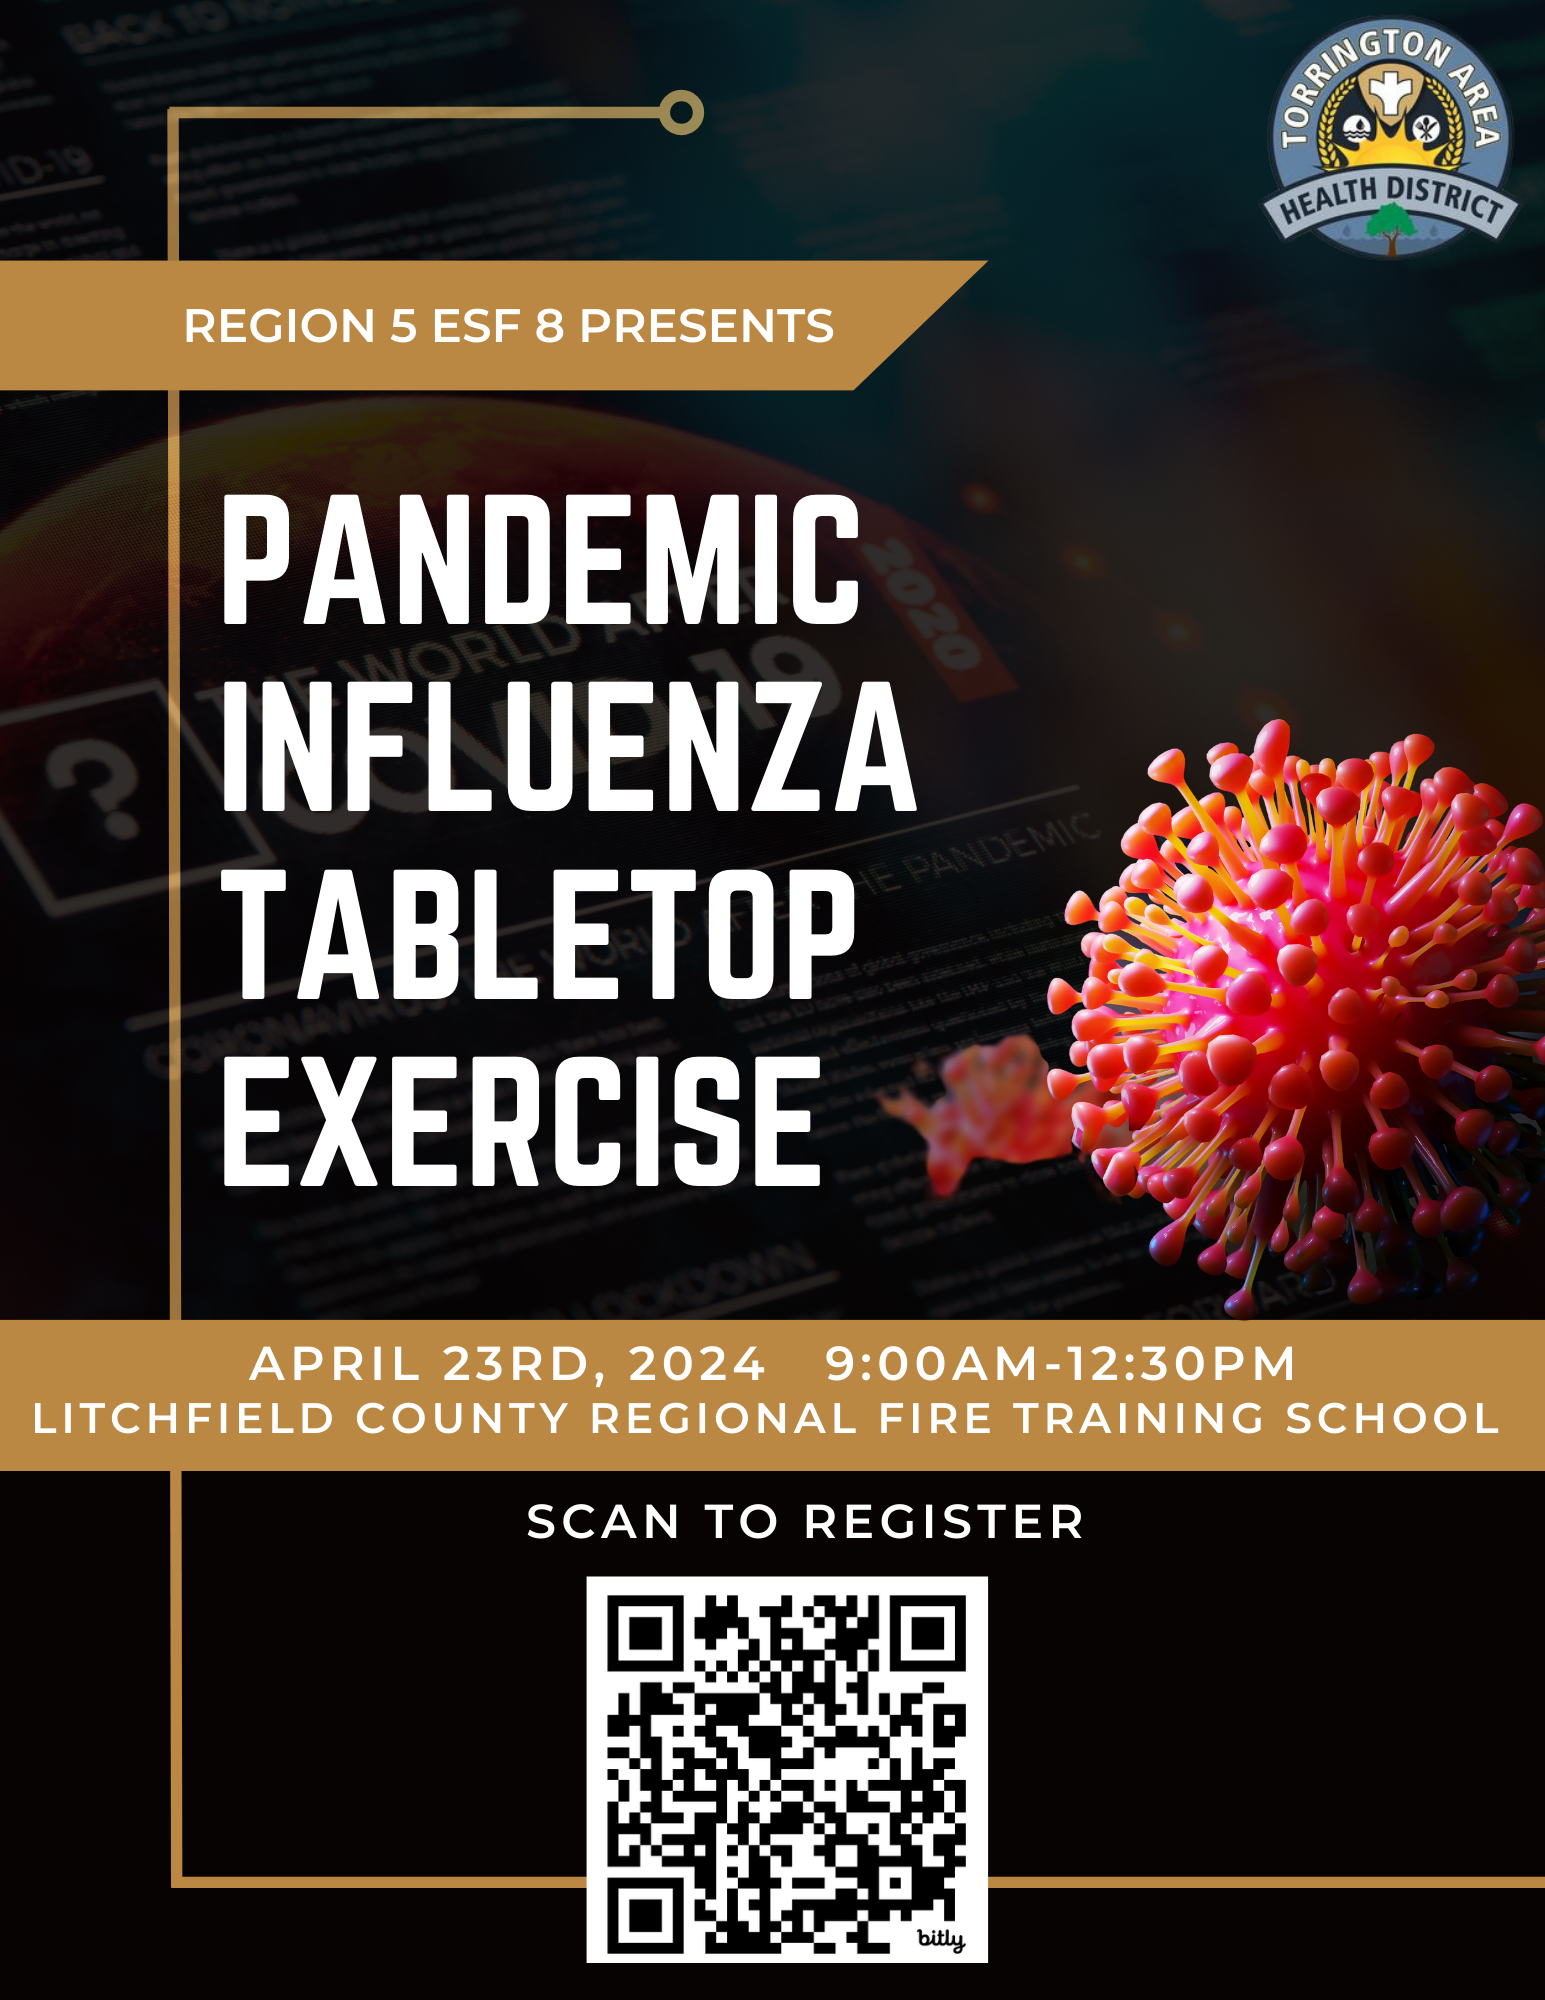 Pandemic_influenza_tabletop_exercise_(2)